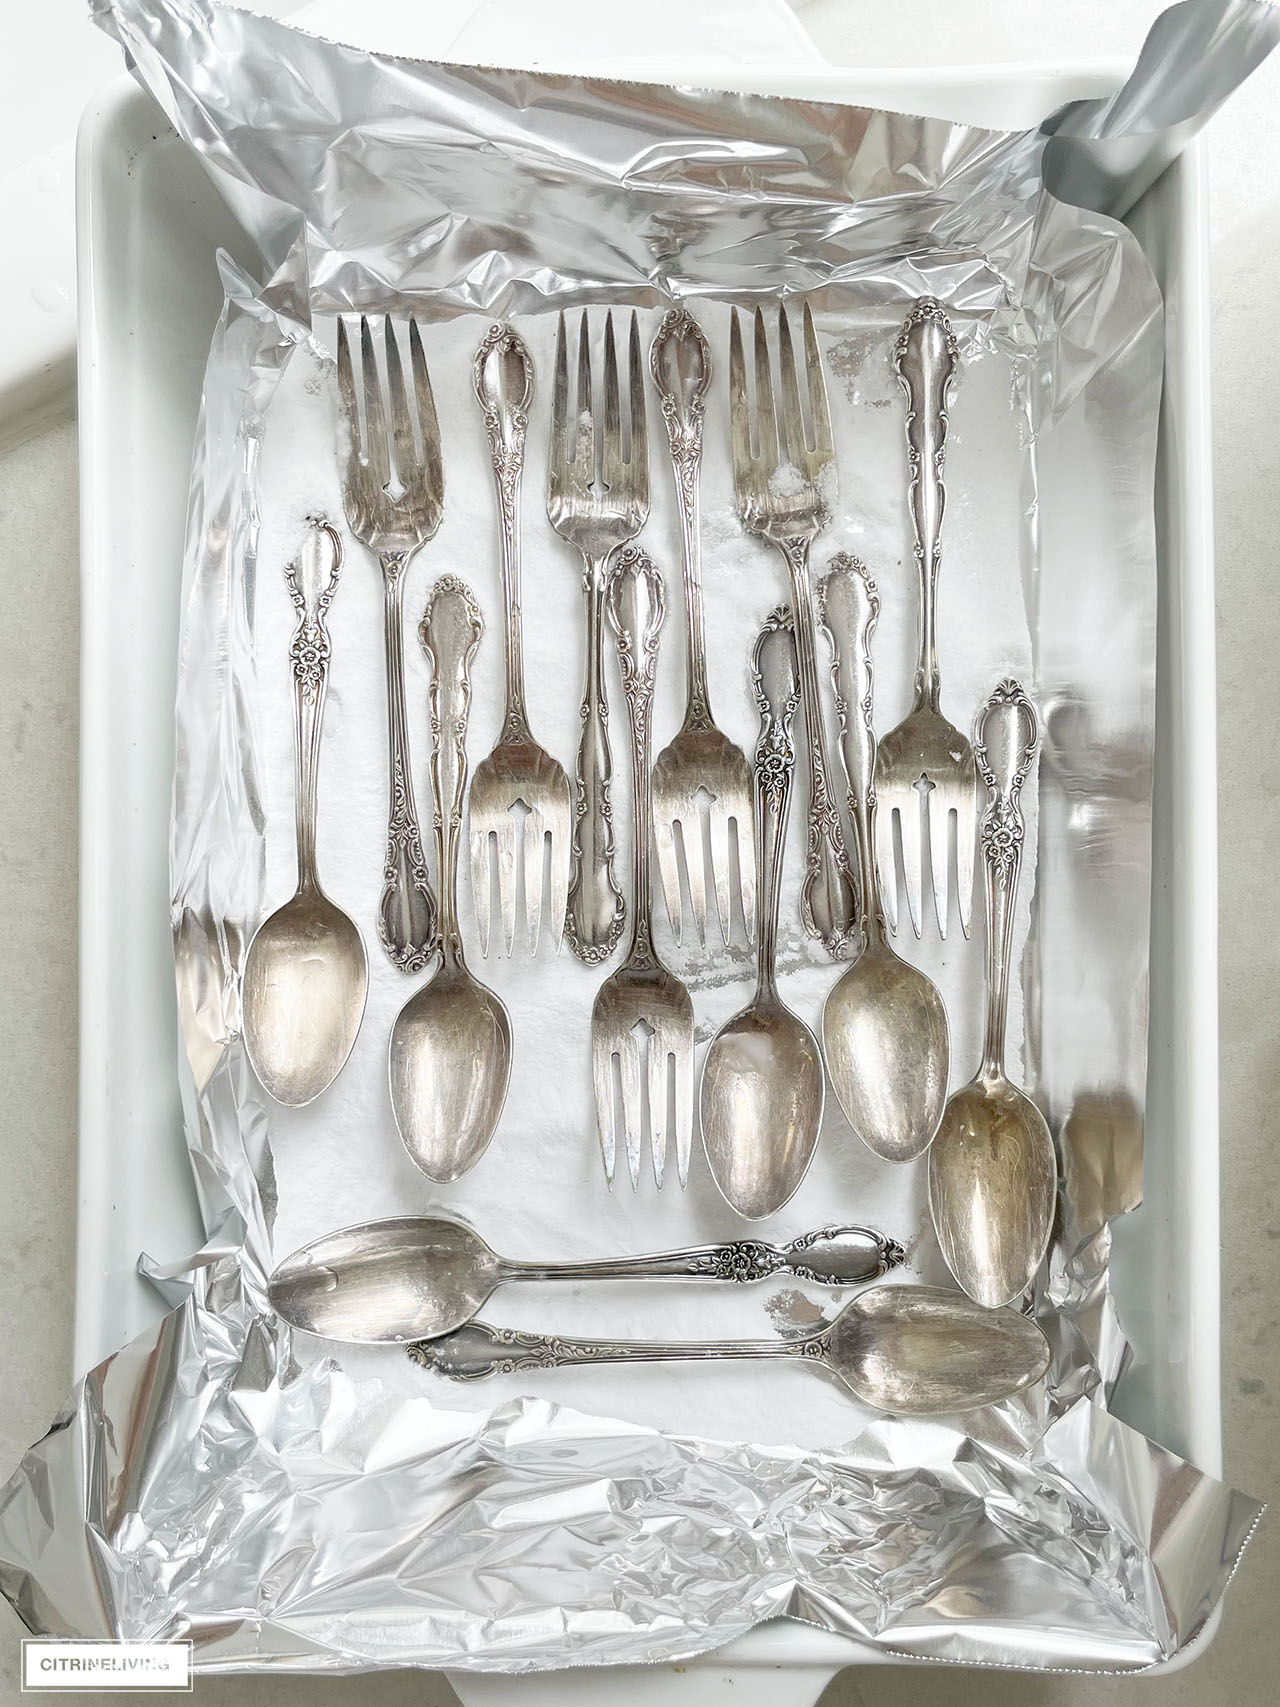 How to Clean Silverware